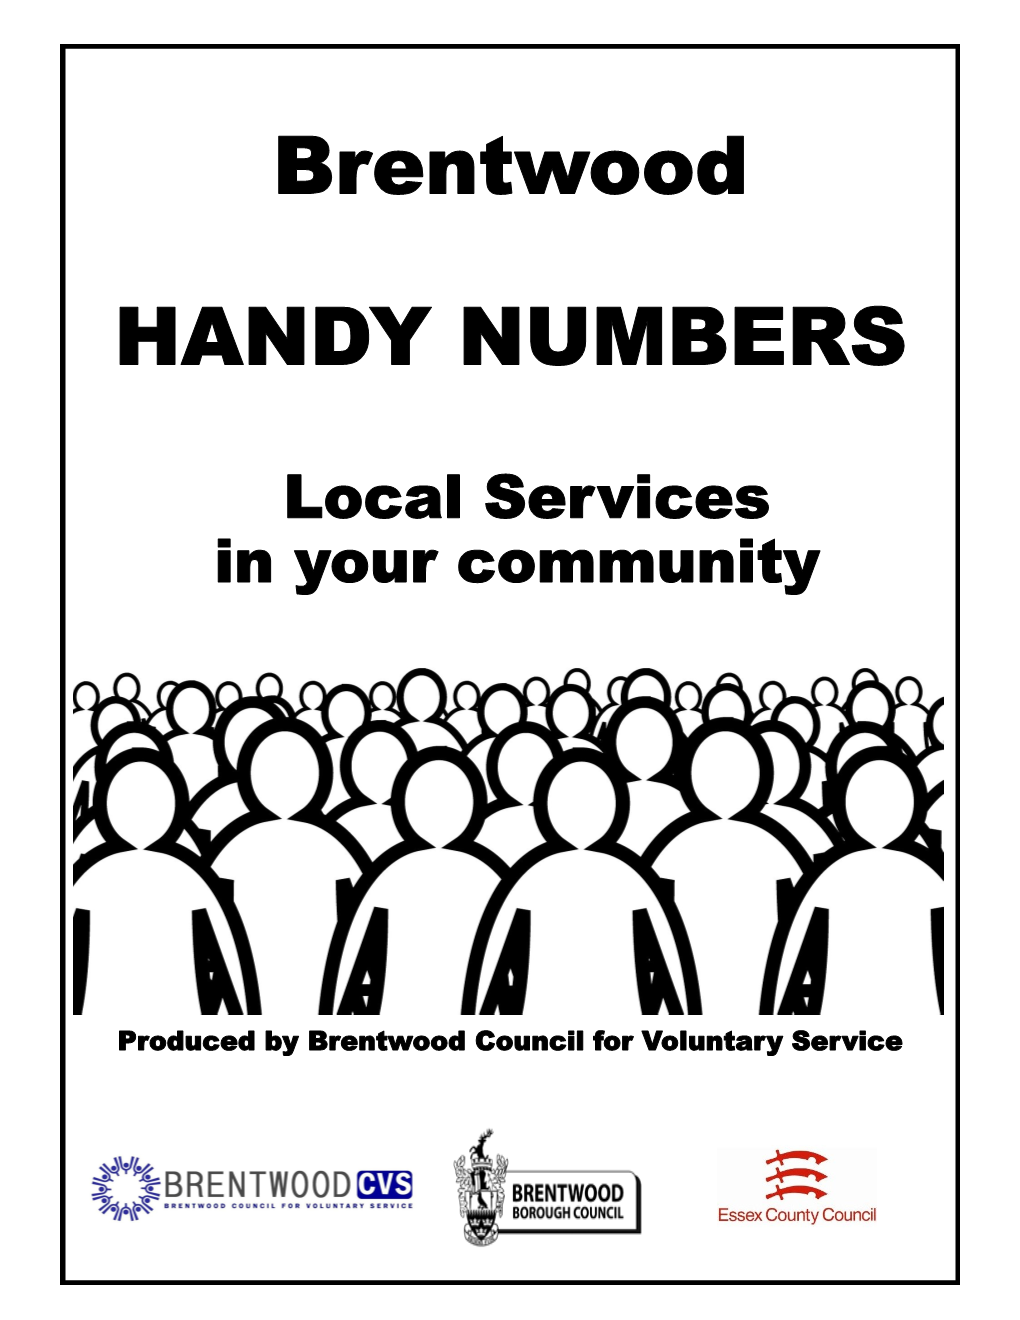 Brentwood HANDY NUMBERS